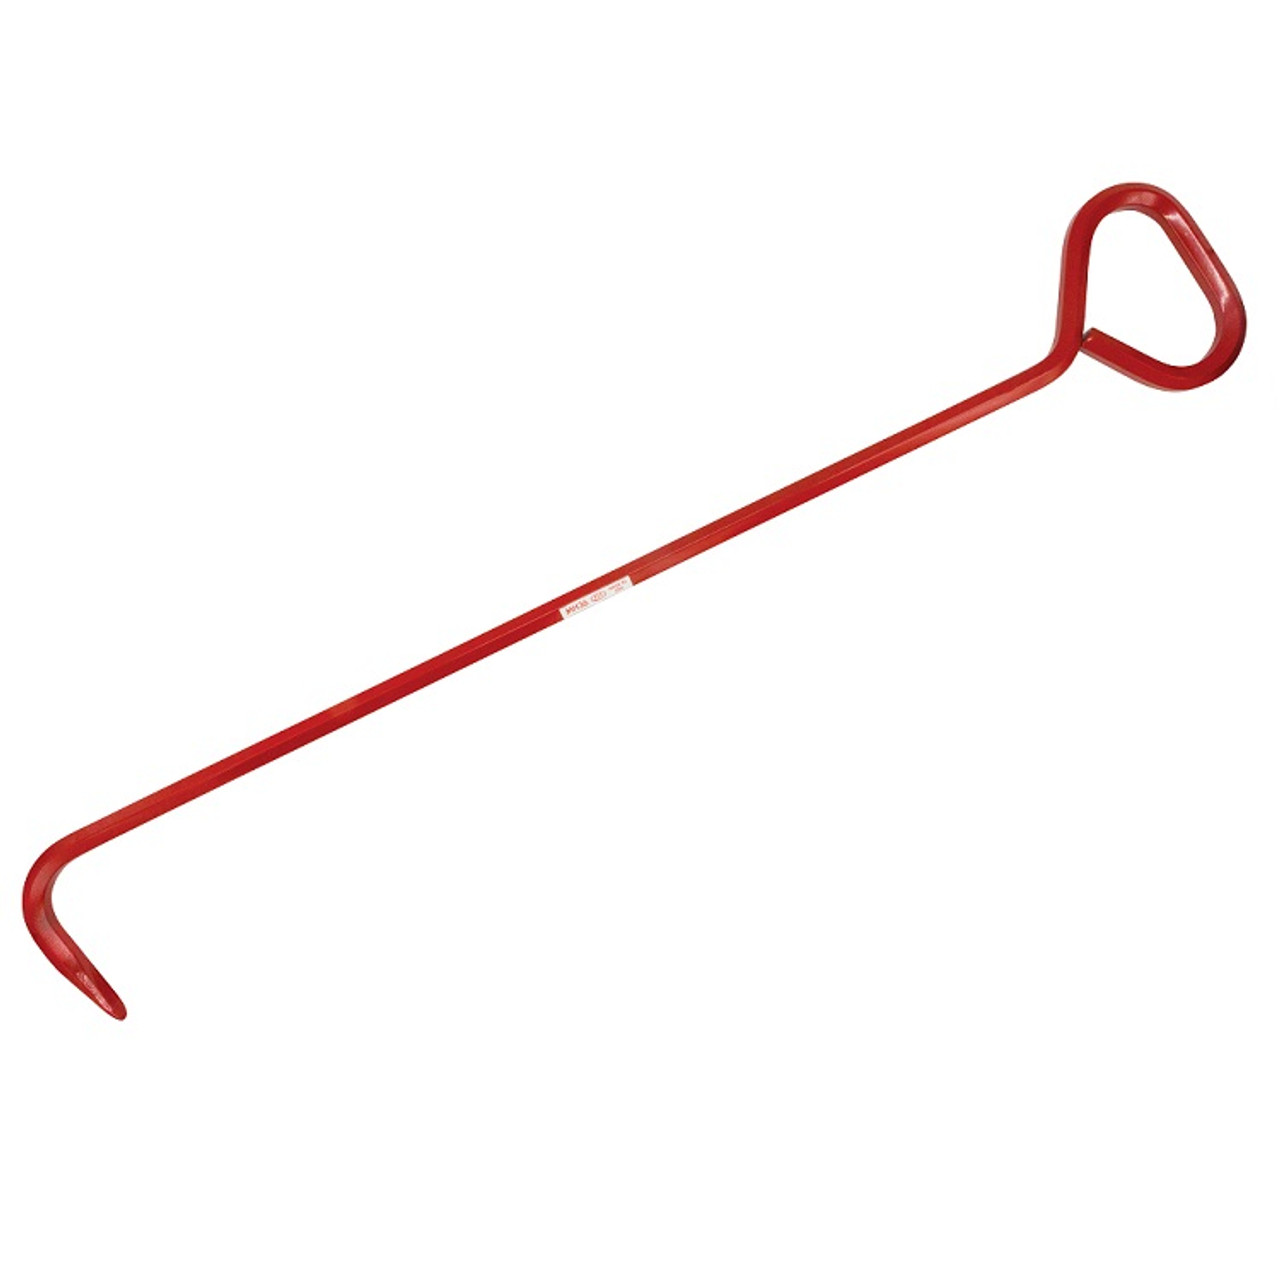 Reed 36 Manhole Hook MH36 02303 - The Drainage Products Store